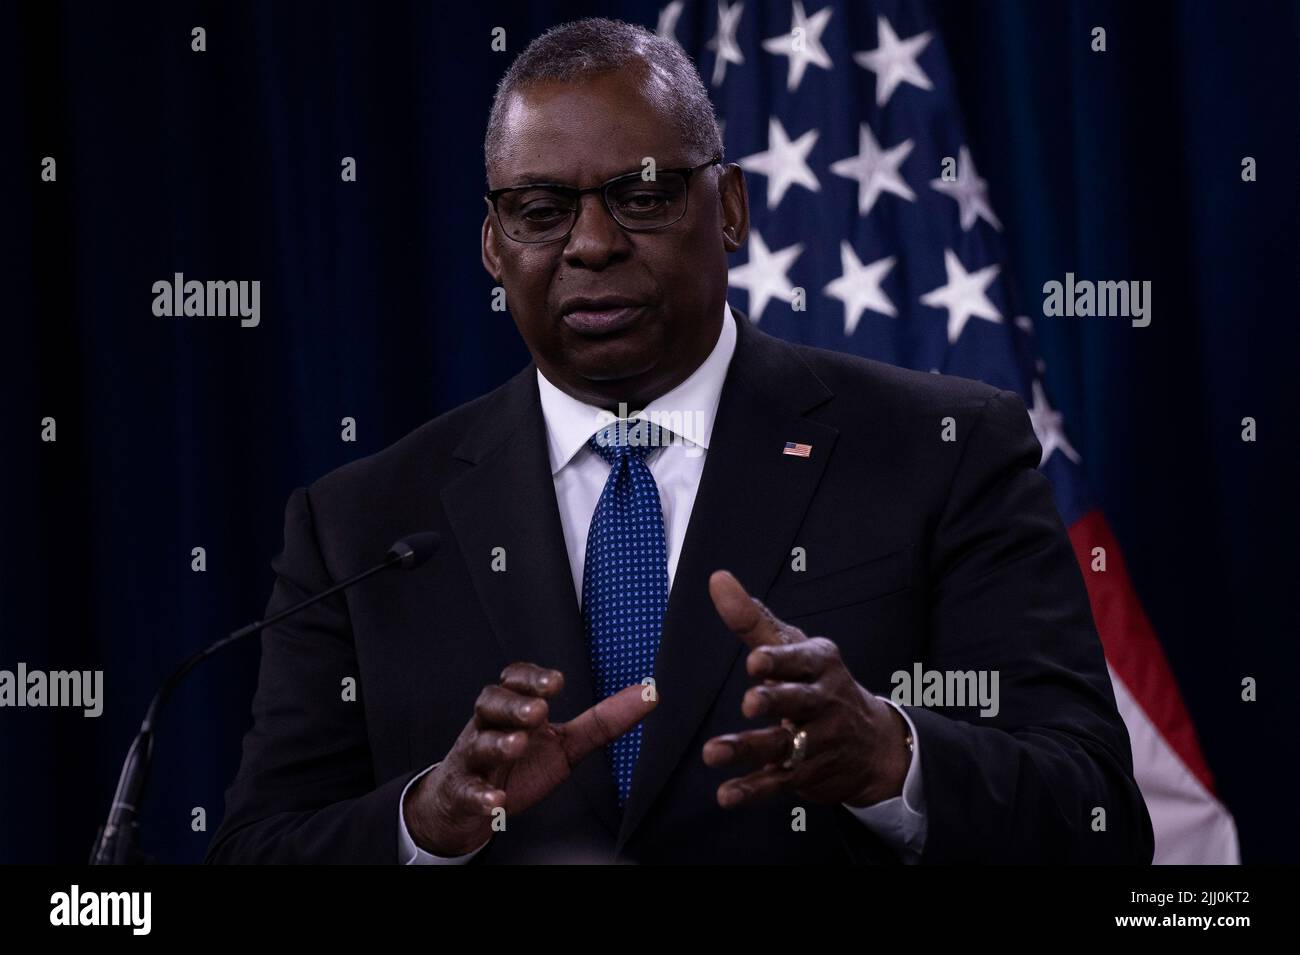 Arlington, United States Of America. 20th July, 2022. Arlington, United States of America. 20 July, 2022. U.S. Secretary of Defense Lloyd Austin, responds to a question during a press conference at the Pentagon, July 20, 2022 in Arlington, Virginia. Credit: Chad J. McNeeley/DOD/Alamy Live News Stock Photo